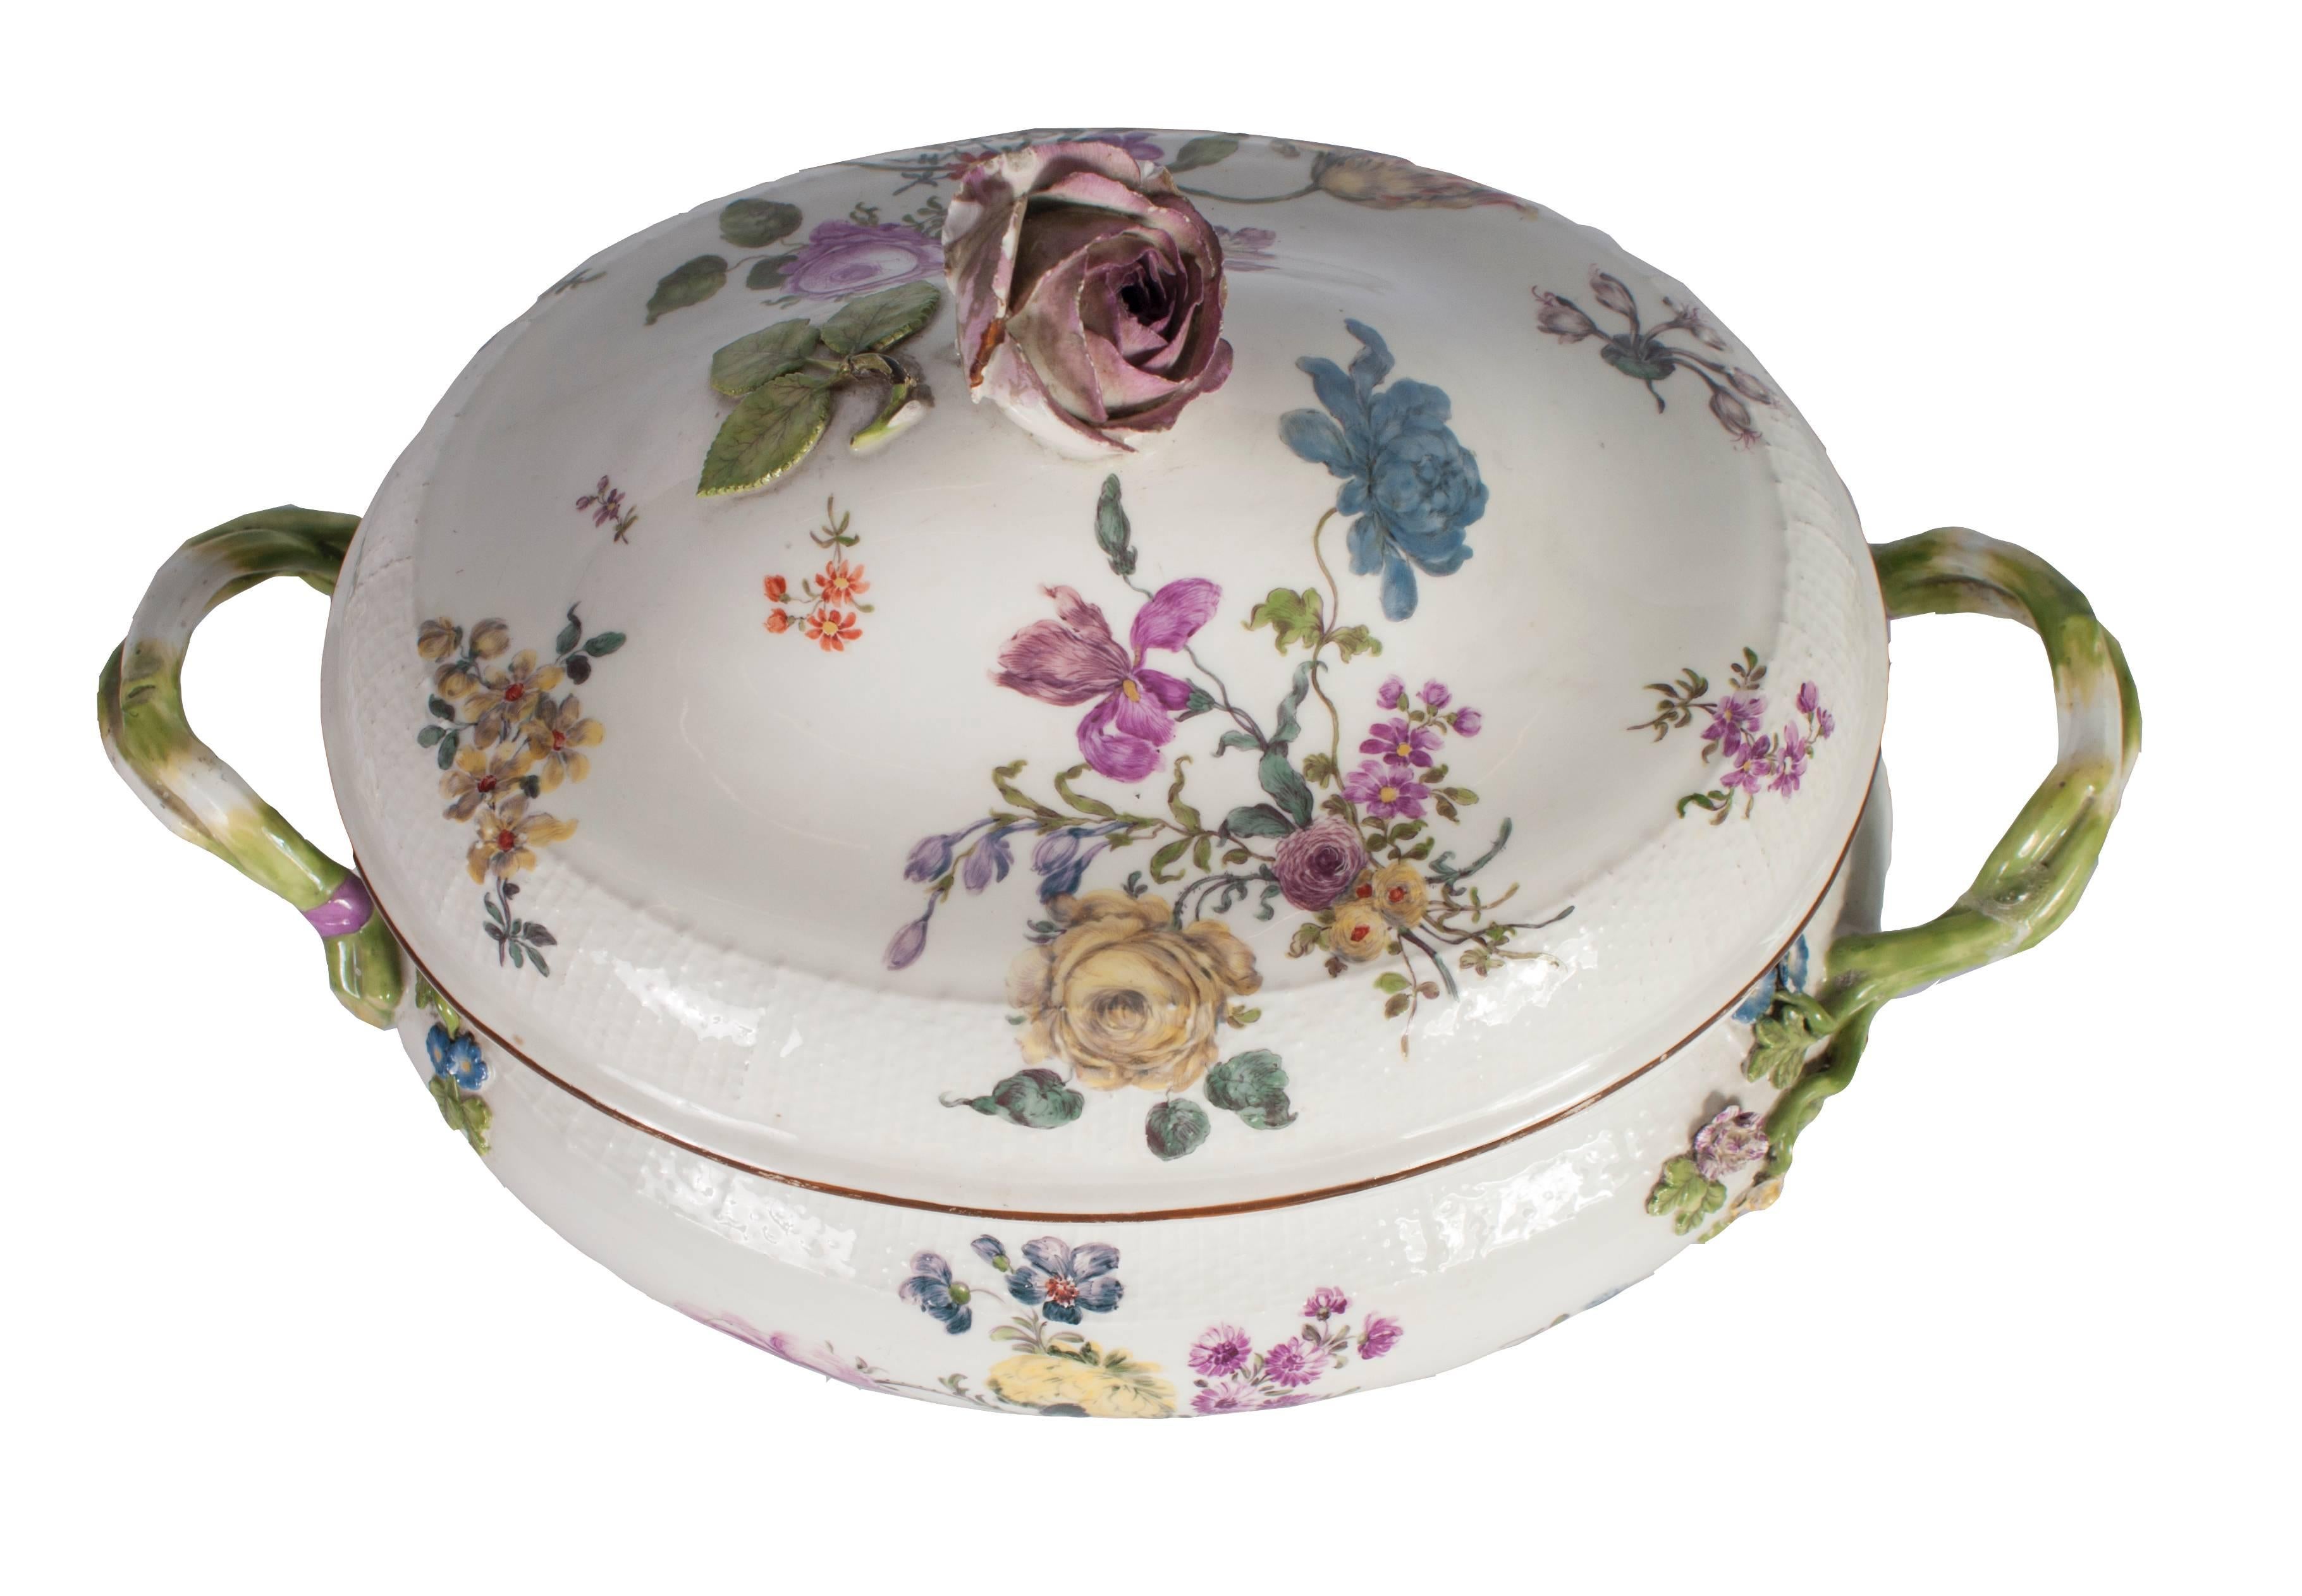 Very colorful Meissen soup tureen with flora decoration to the lid and tureen.
There is small crack which is more noticeable from the inside.